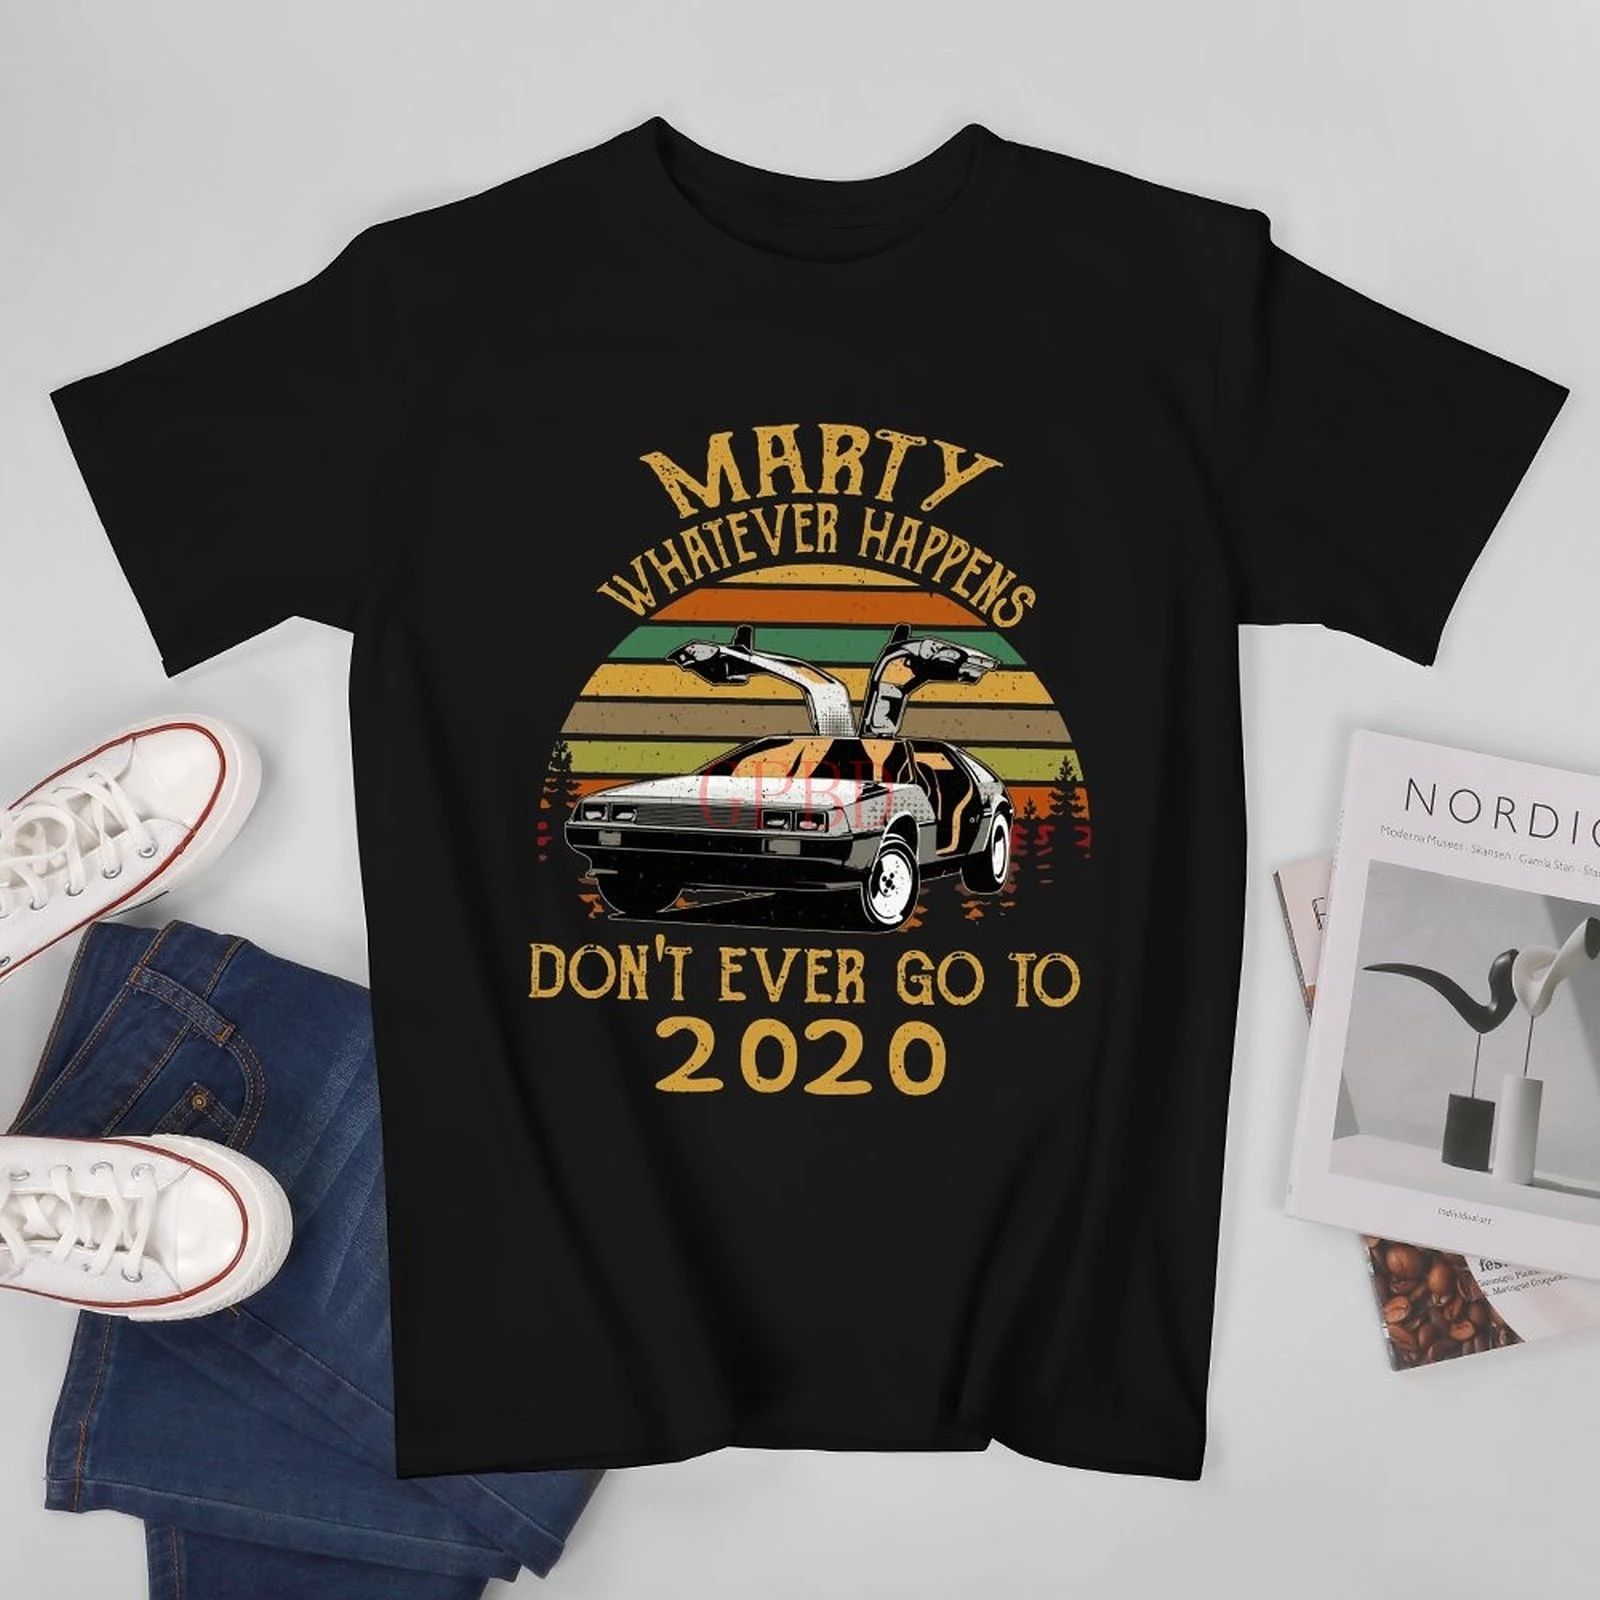 

Vintage Marty Whatever Happens Don't Ever Go To 2020 Shirt Back To The Future Car T shirt Comedy Movie Funny Gift For Men Women